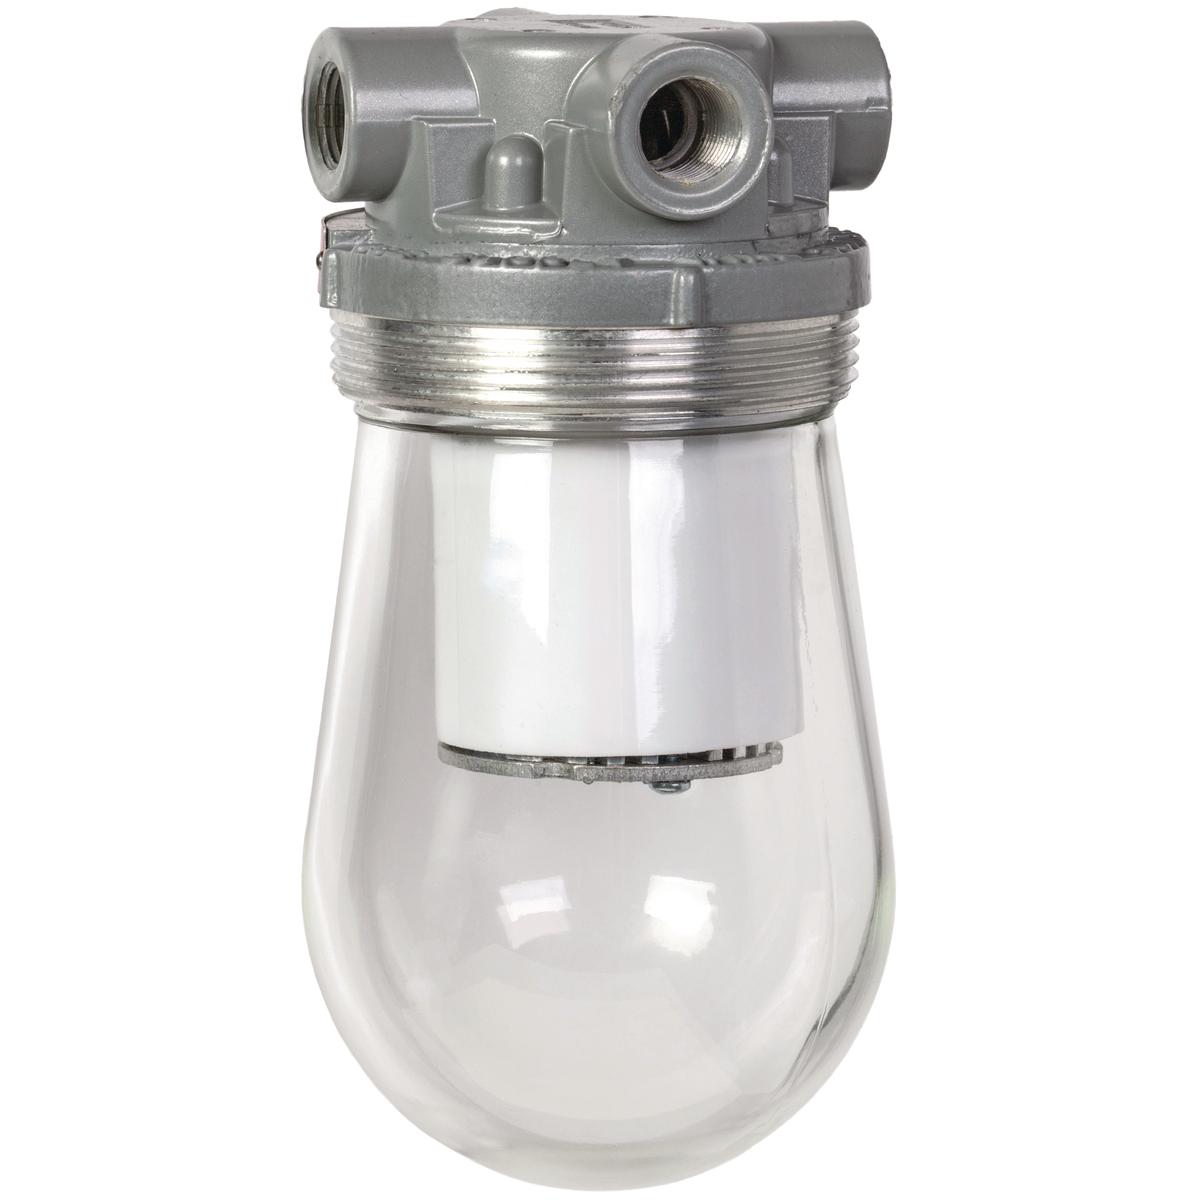 Hubbell DVL1630X2G DVL Series LED Dust Tight/ Utility Hazardous Rated 16 Watt, 120-277 VAC 5000K, 1355 Lumens  ; Compact in Size with Traditional Industrial Appearance and Suitability ; DVL LED Housings can be retrofitted to existing DV Series splice boxes to upgrade from i